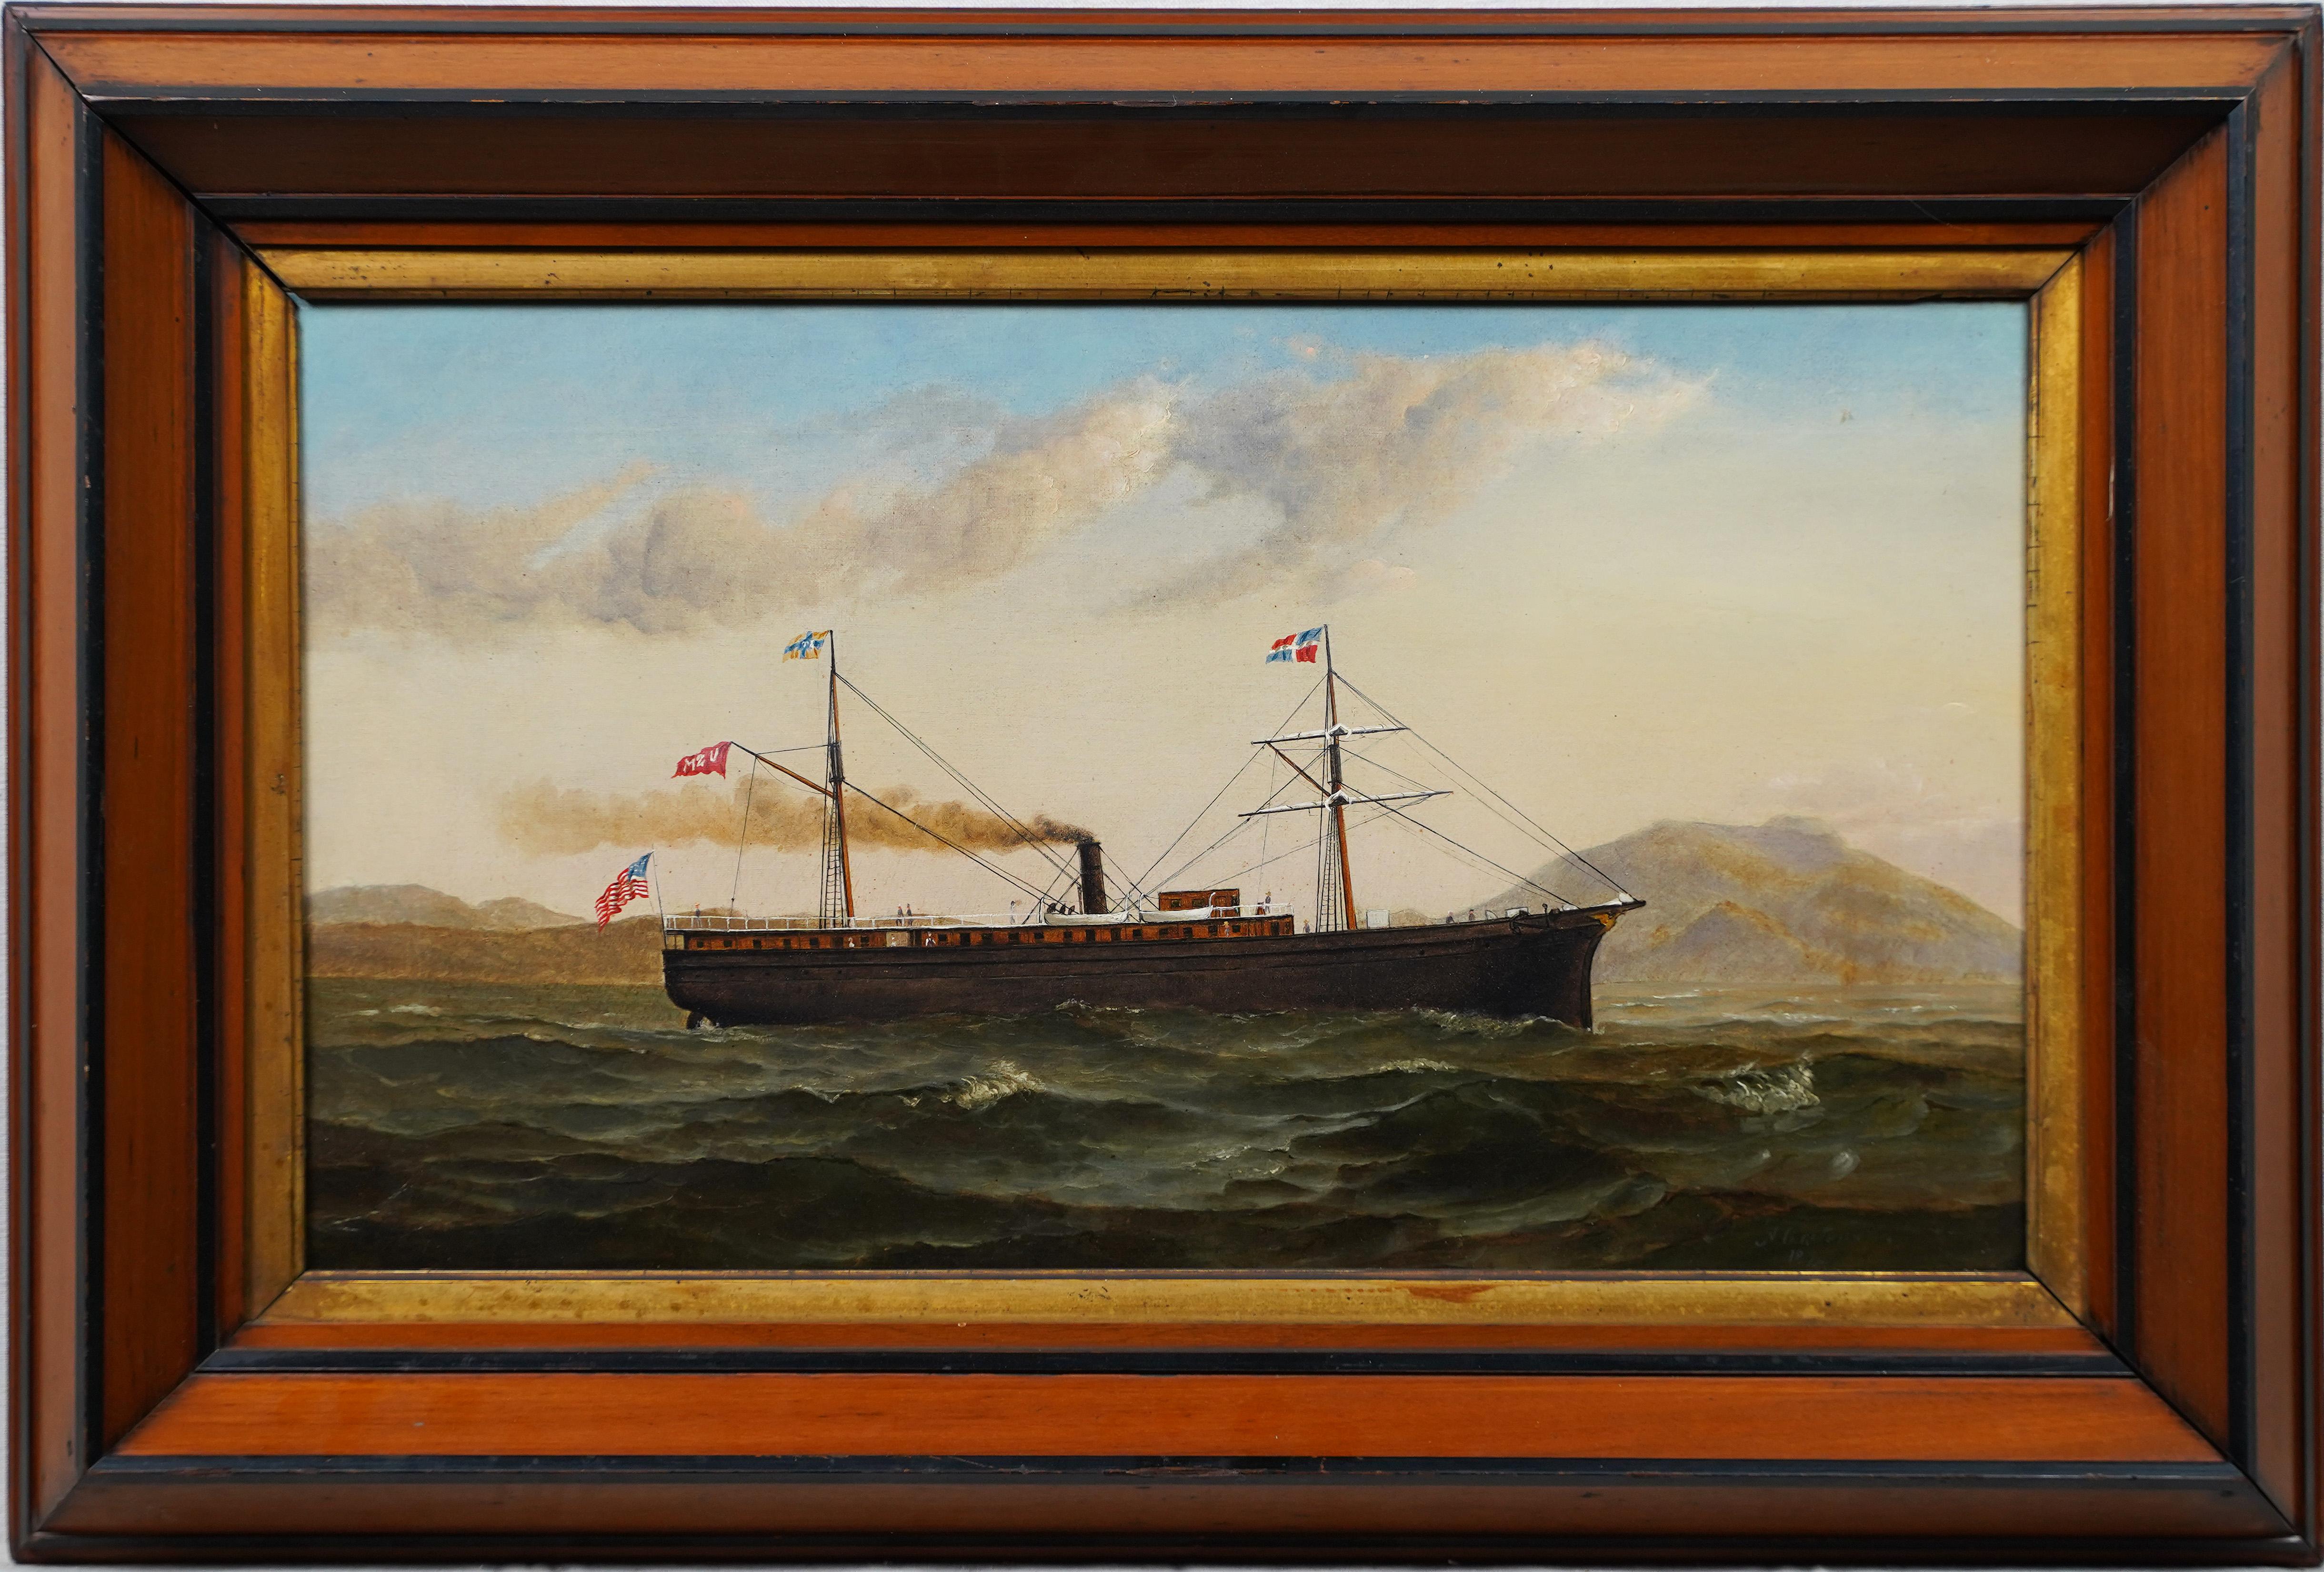 Antique American nautical ship oil painting.  Oil on canvas.  Signed.  Framed.  